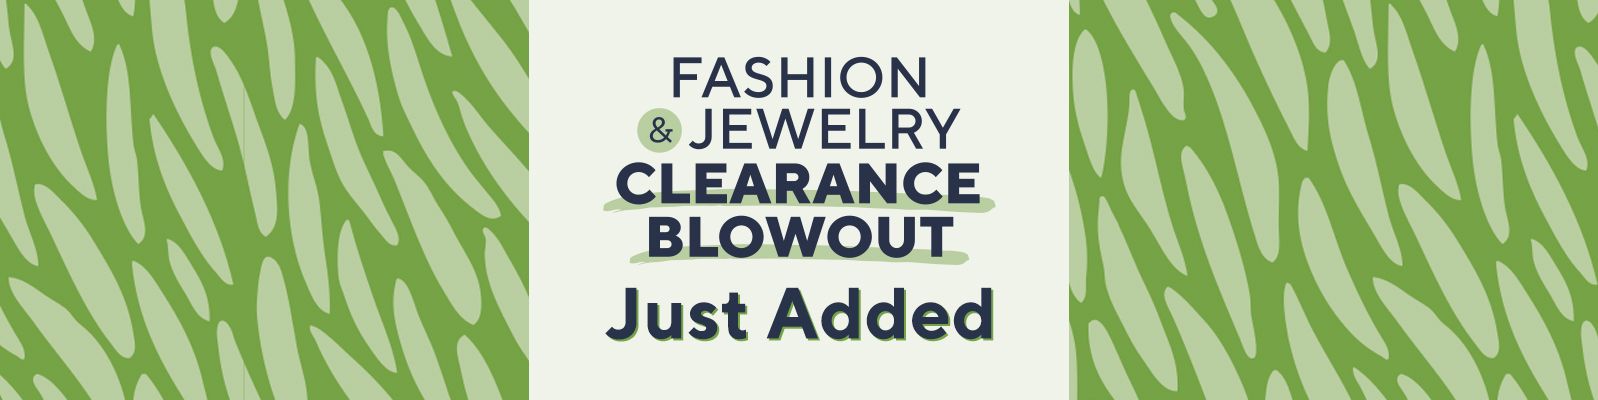 Fashion & Jewelry Clearance Blowout Just Added